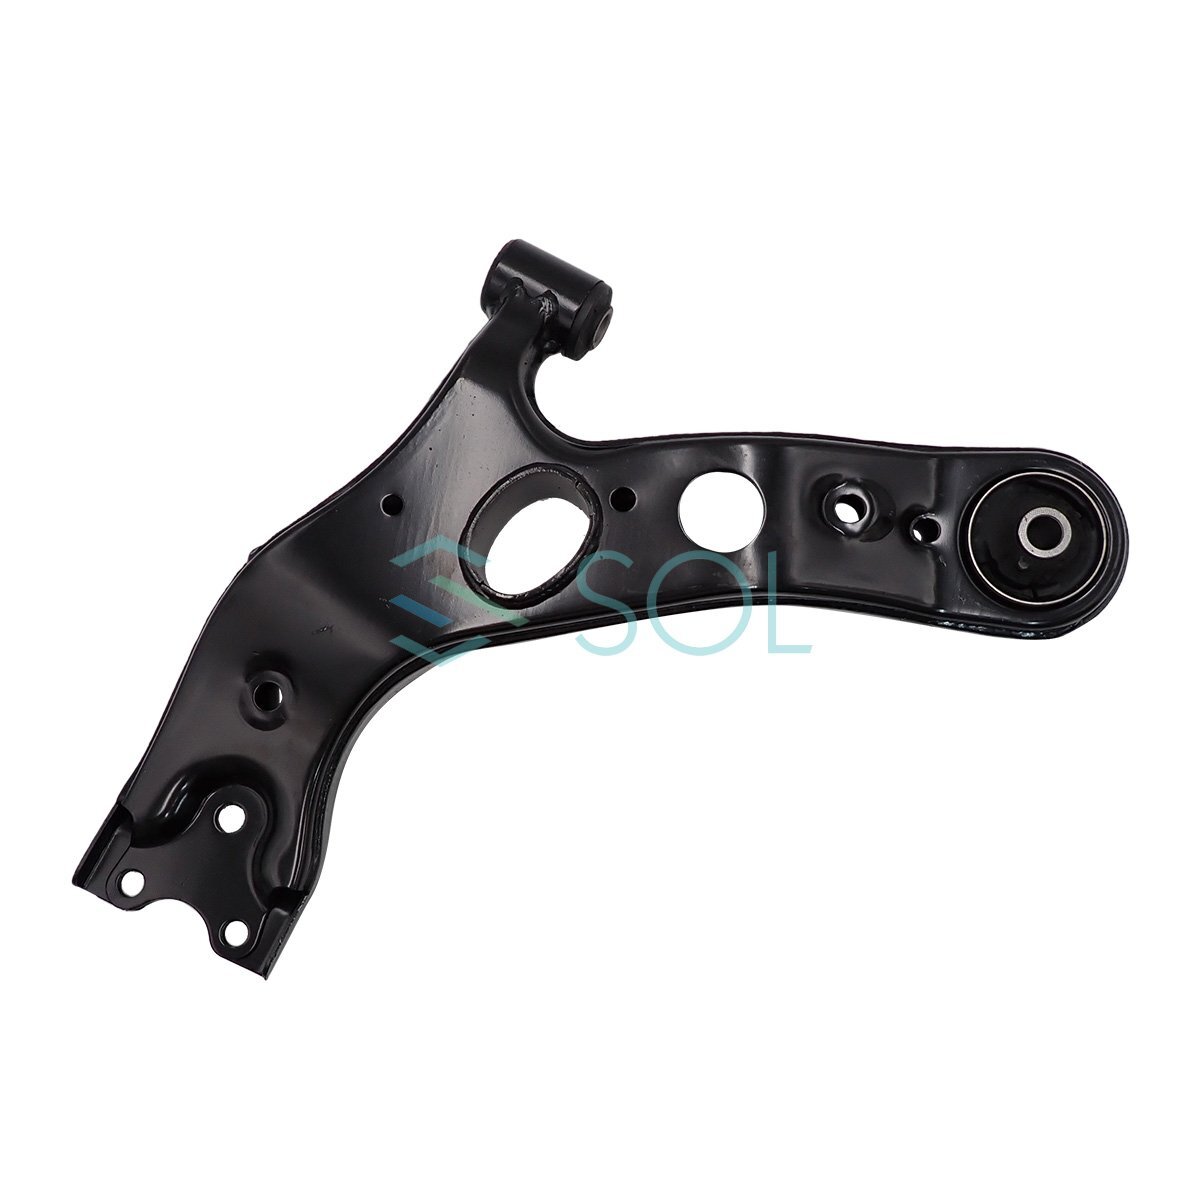  Toyota TOYOTA Vellfire GGH30W GGH35W front lower arm control arm right side shipping deadline 18 hour car make special design 48068-28140